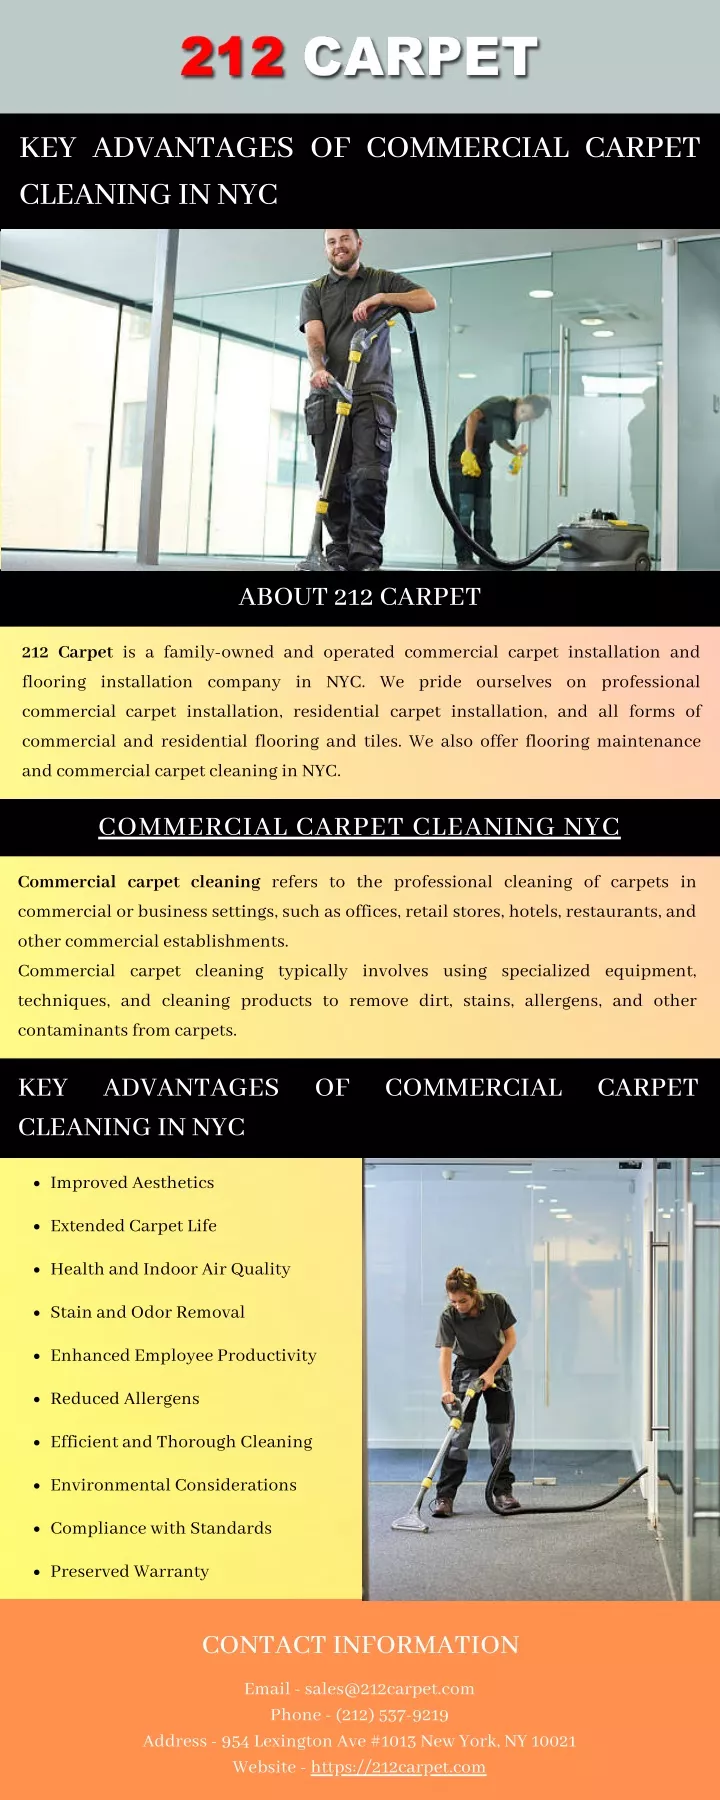 key advantages of commercial carpet cleaning